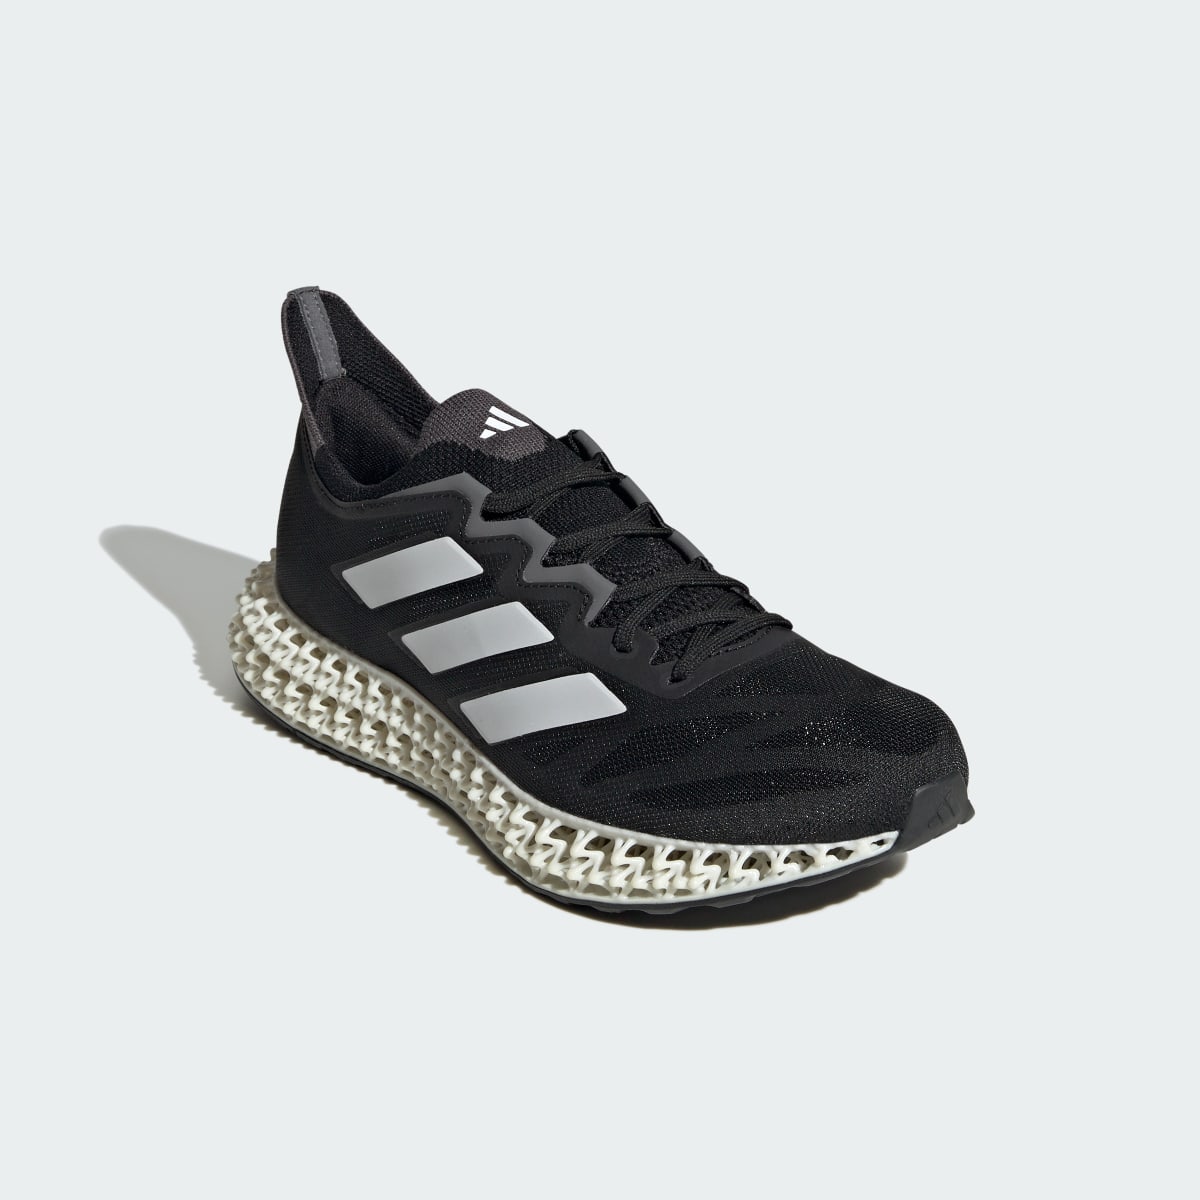 Adidas 4DFWD 3 Running Shoes. 7